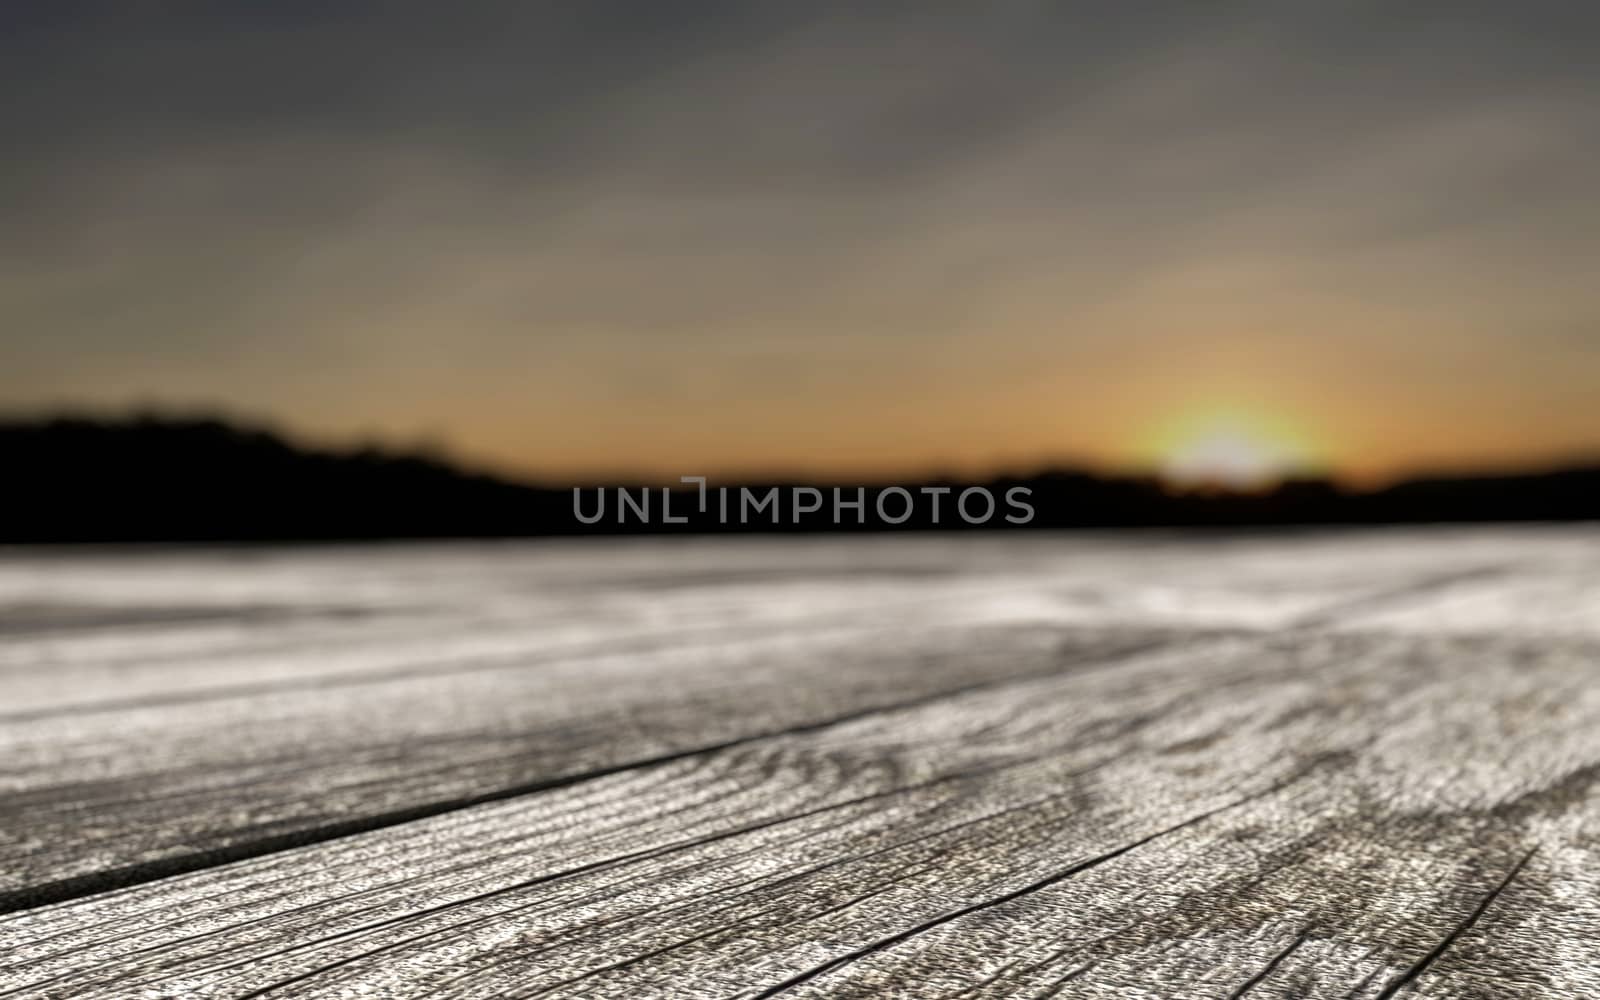 wooden table on a romantic sunset background 3d rendered concept by F1b0nacci